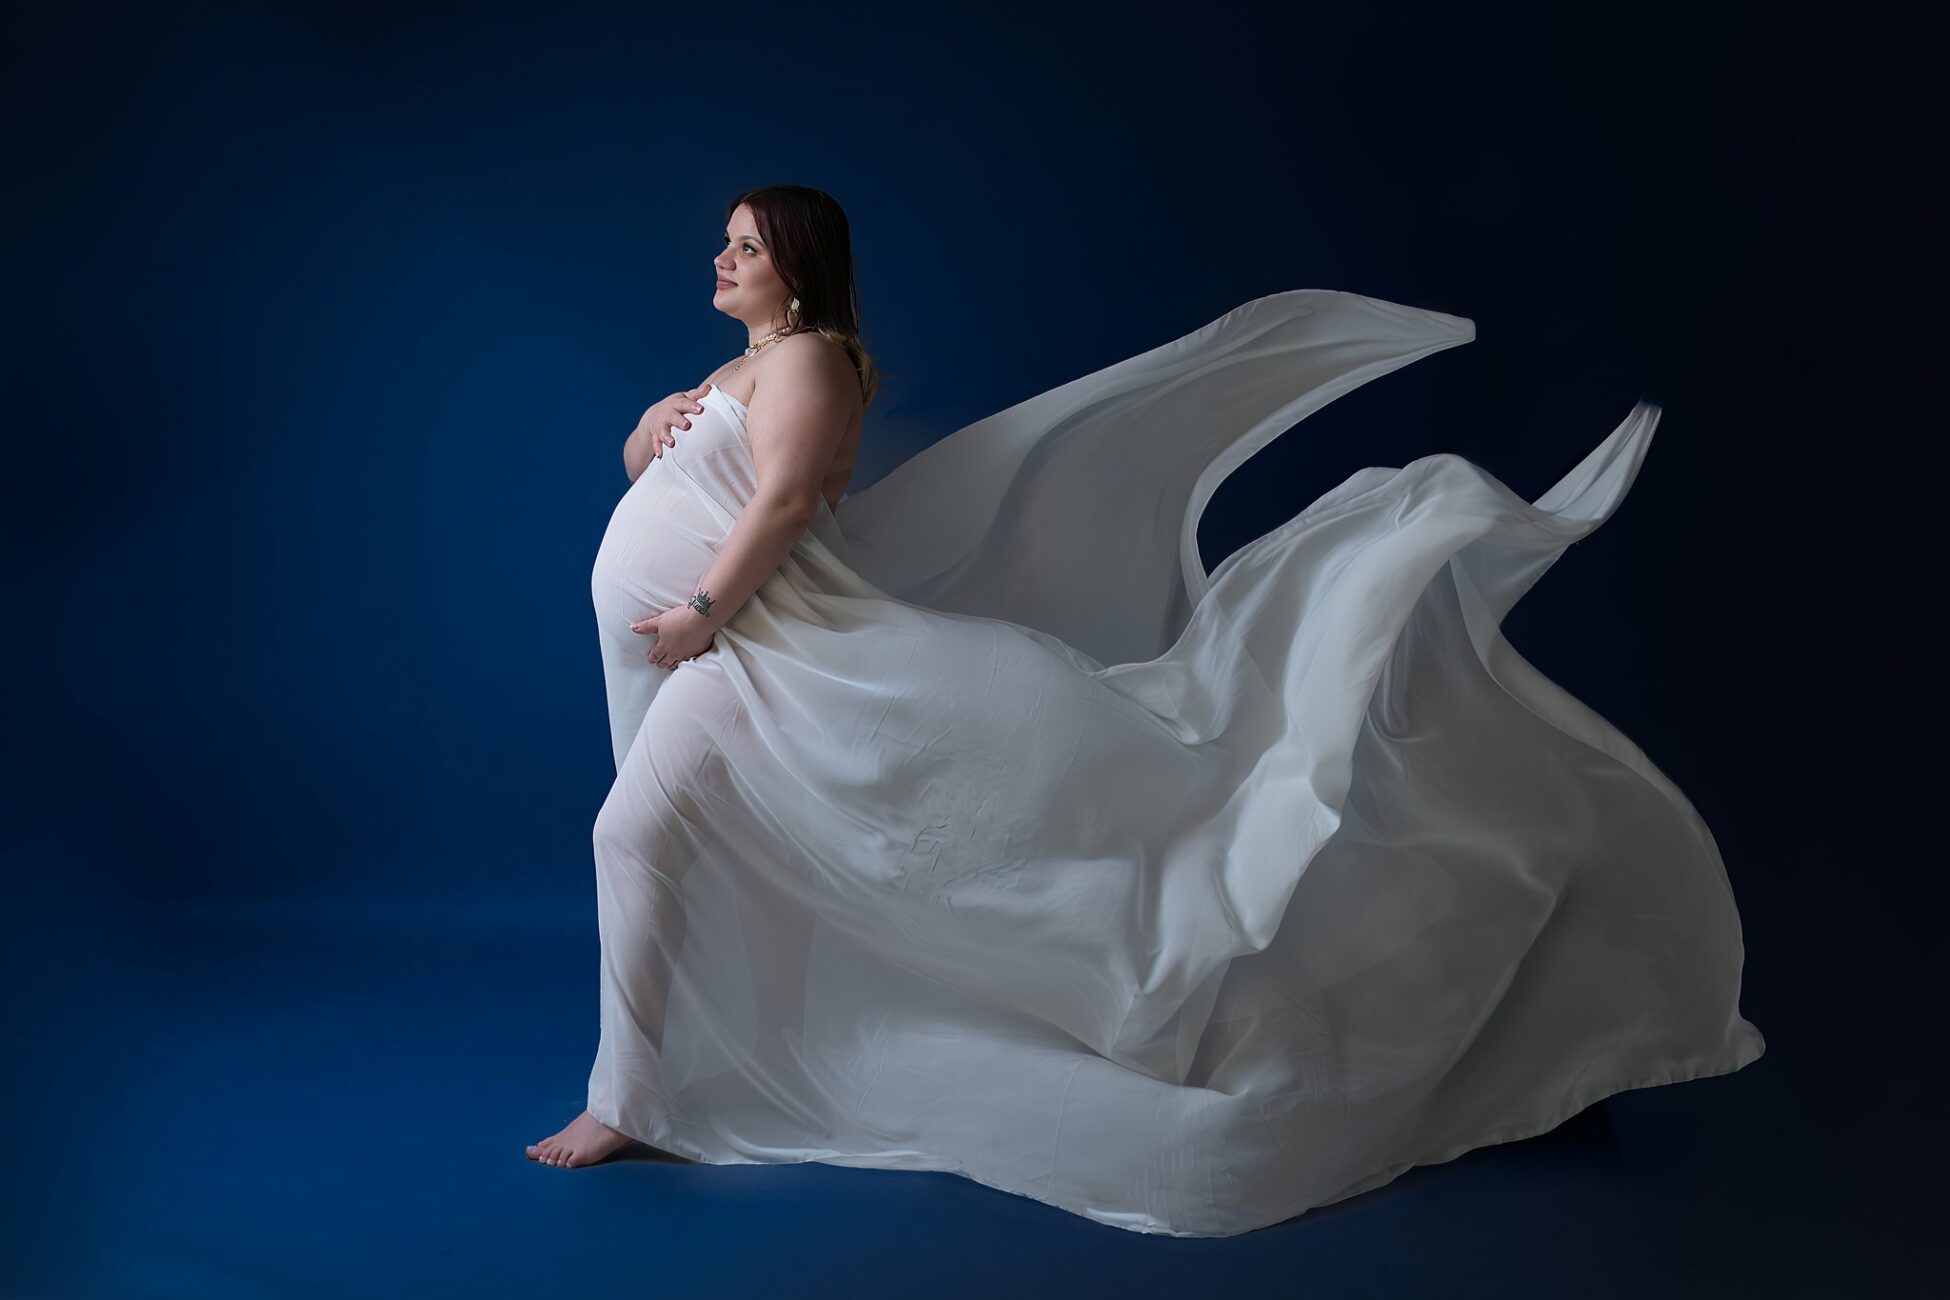 A mother to be stands in a studio holding her bump in a white maternity dress that is flowing in the wind behind her nurtured foundation